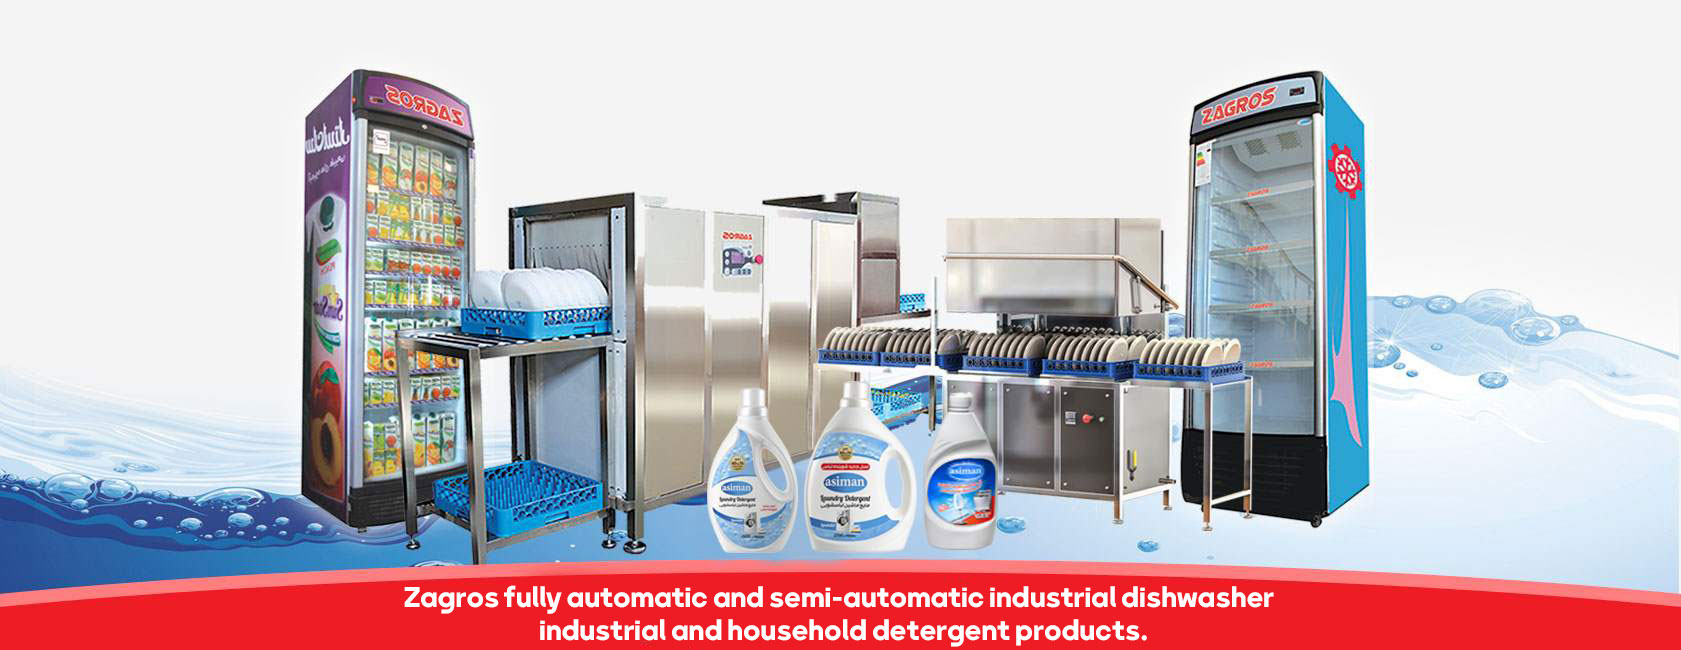 Zagros fully automatic and semi-automatic industrial dishwasher and industrial and household detergent products.